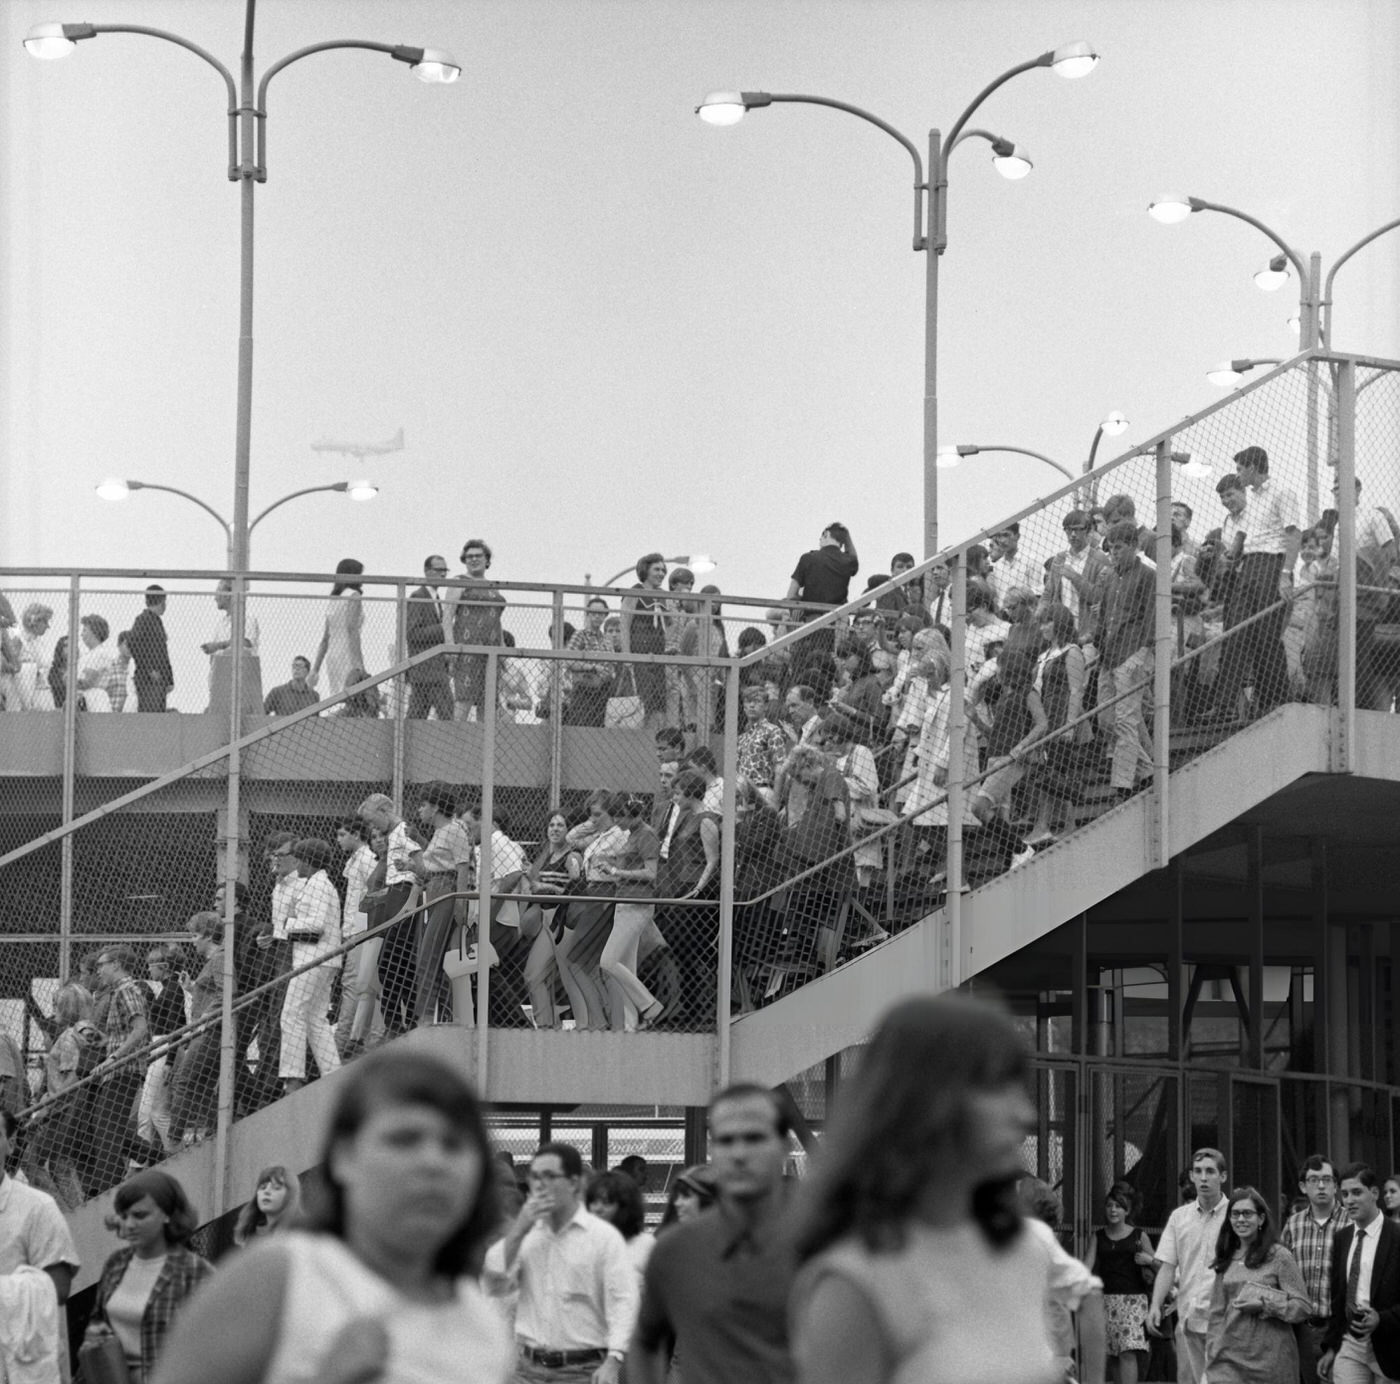 Beatles Fans Exit The 7 Train Subway Stop In Corona, On Their Way To See The Beatles At Shea Stadium, 1966.